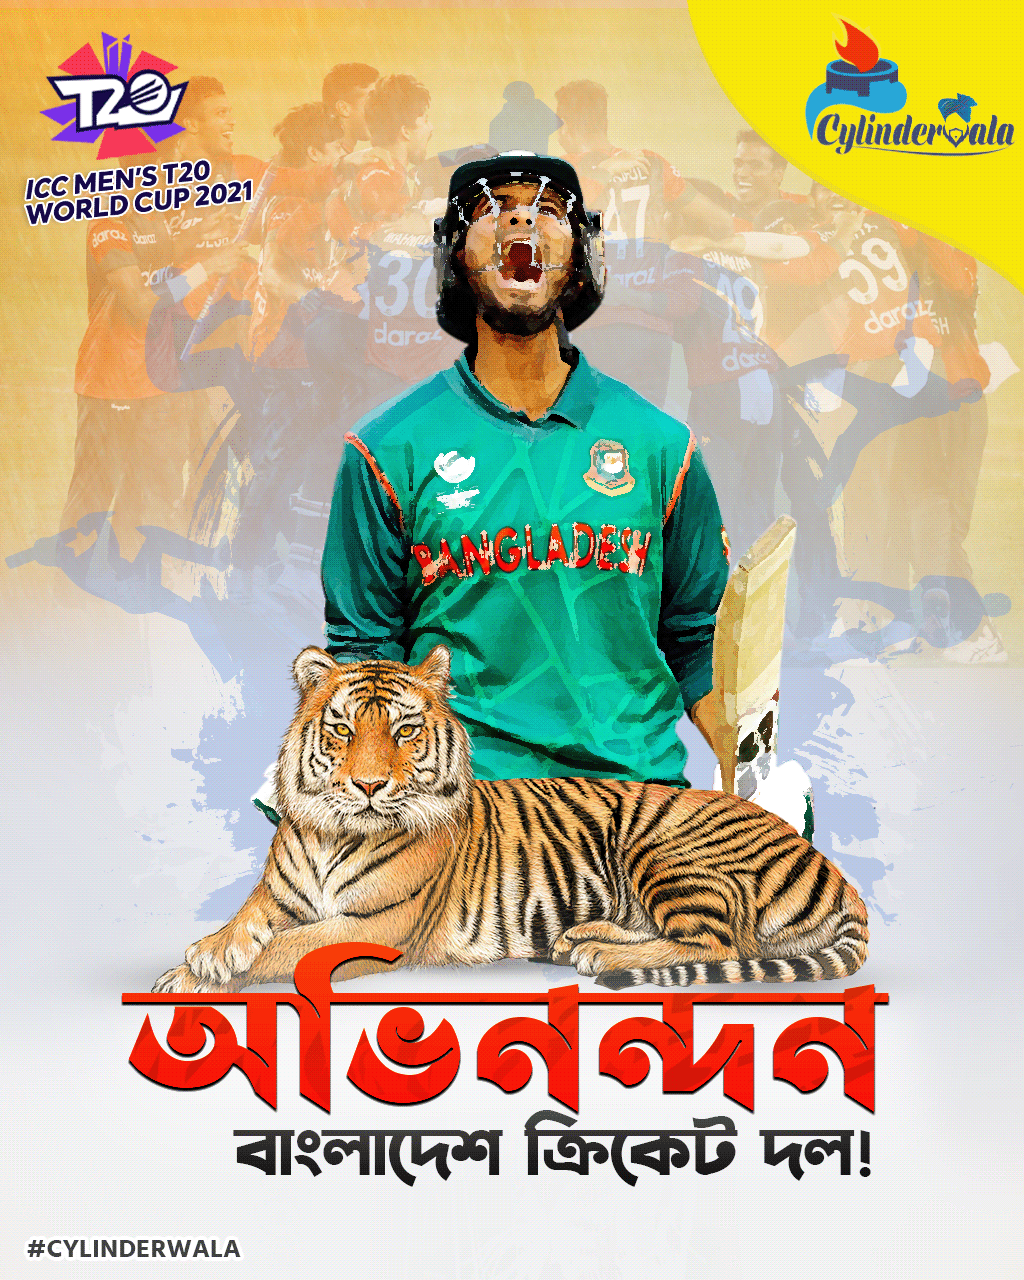 Bangladesh bangladesh cricket Cricket CRICKET MATCH design ICC ICC world cup 201 sports Sports Design world cup